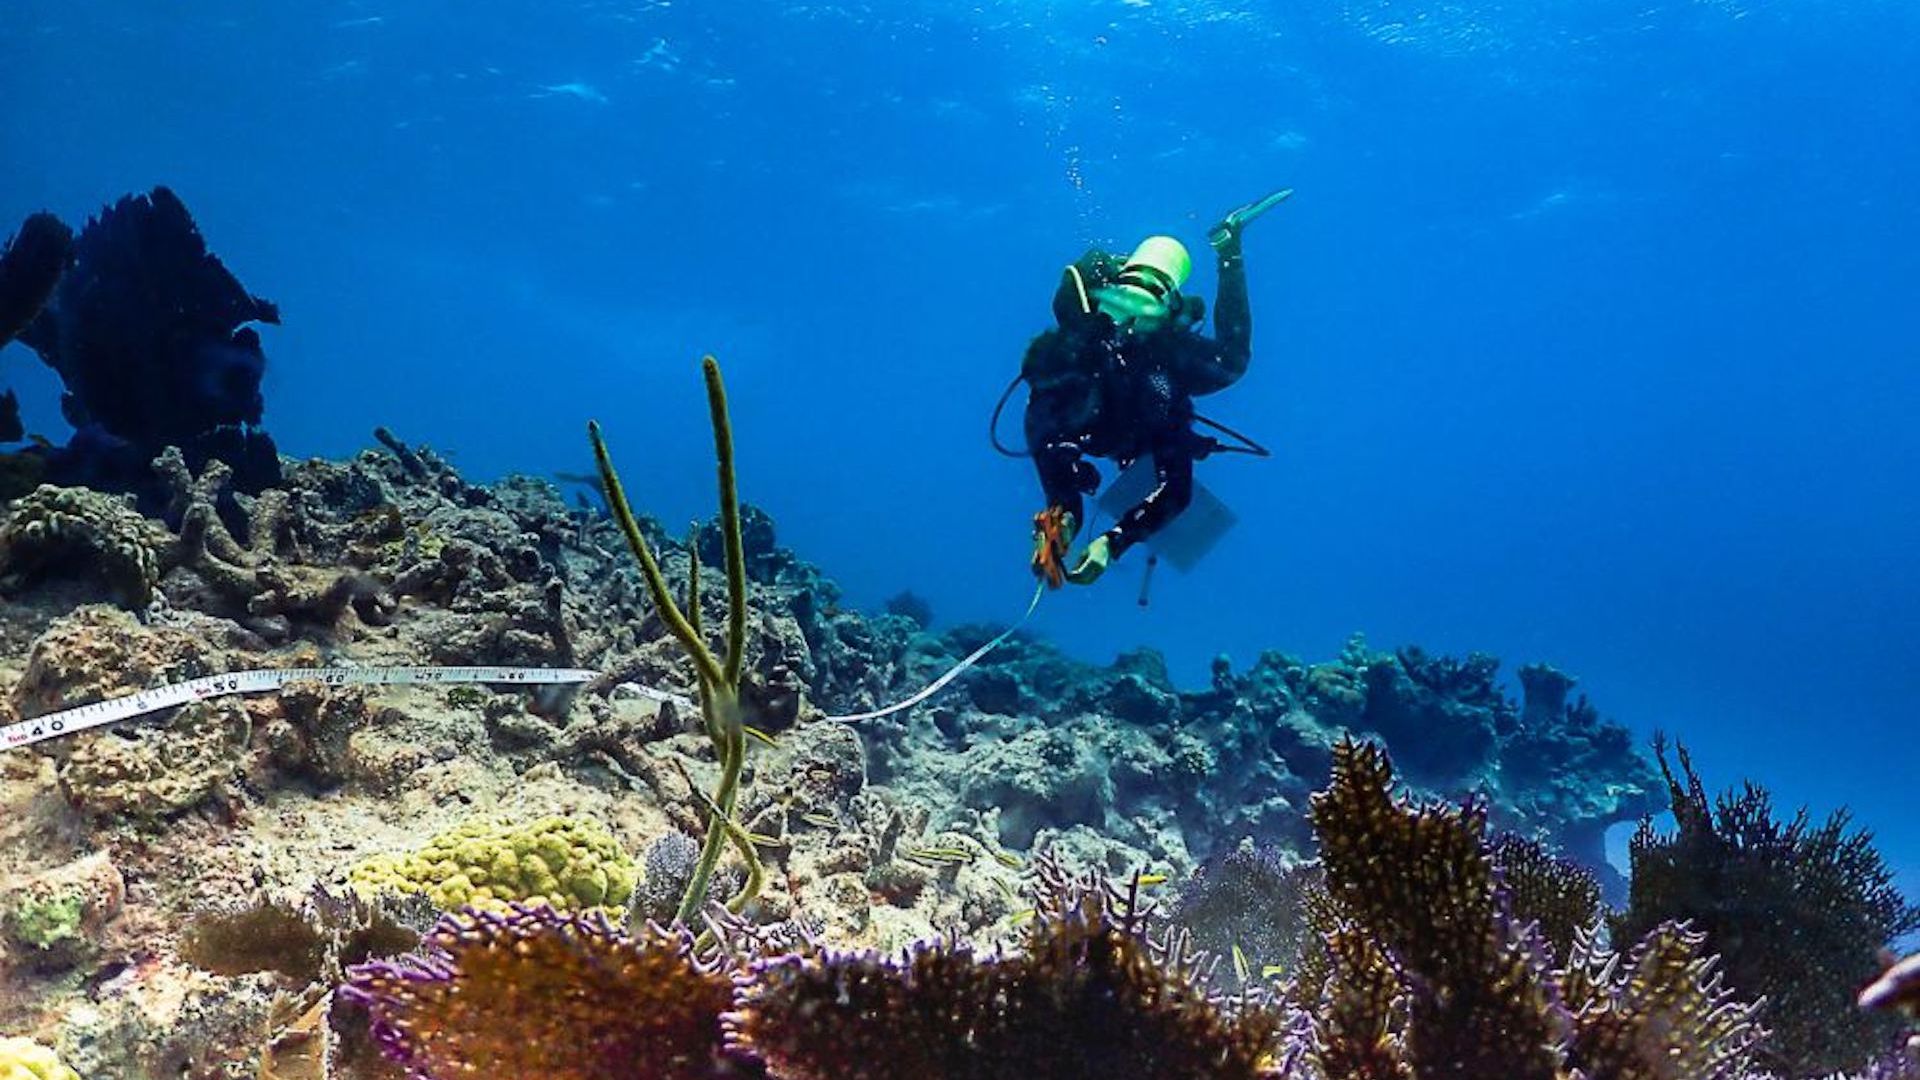 A photo of a diver using instruments to survey coral reef damage in the Florida Keys.